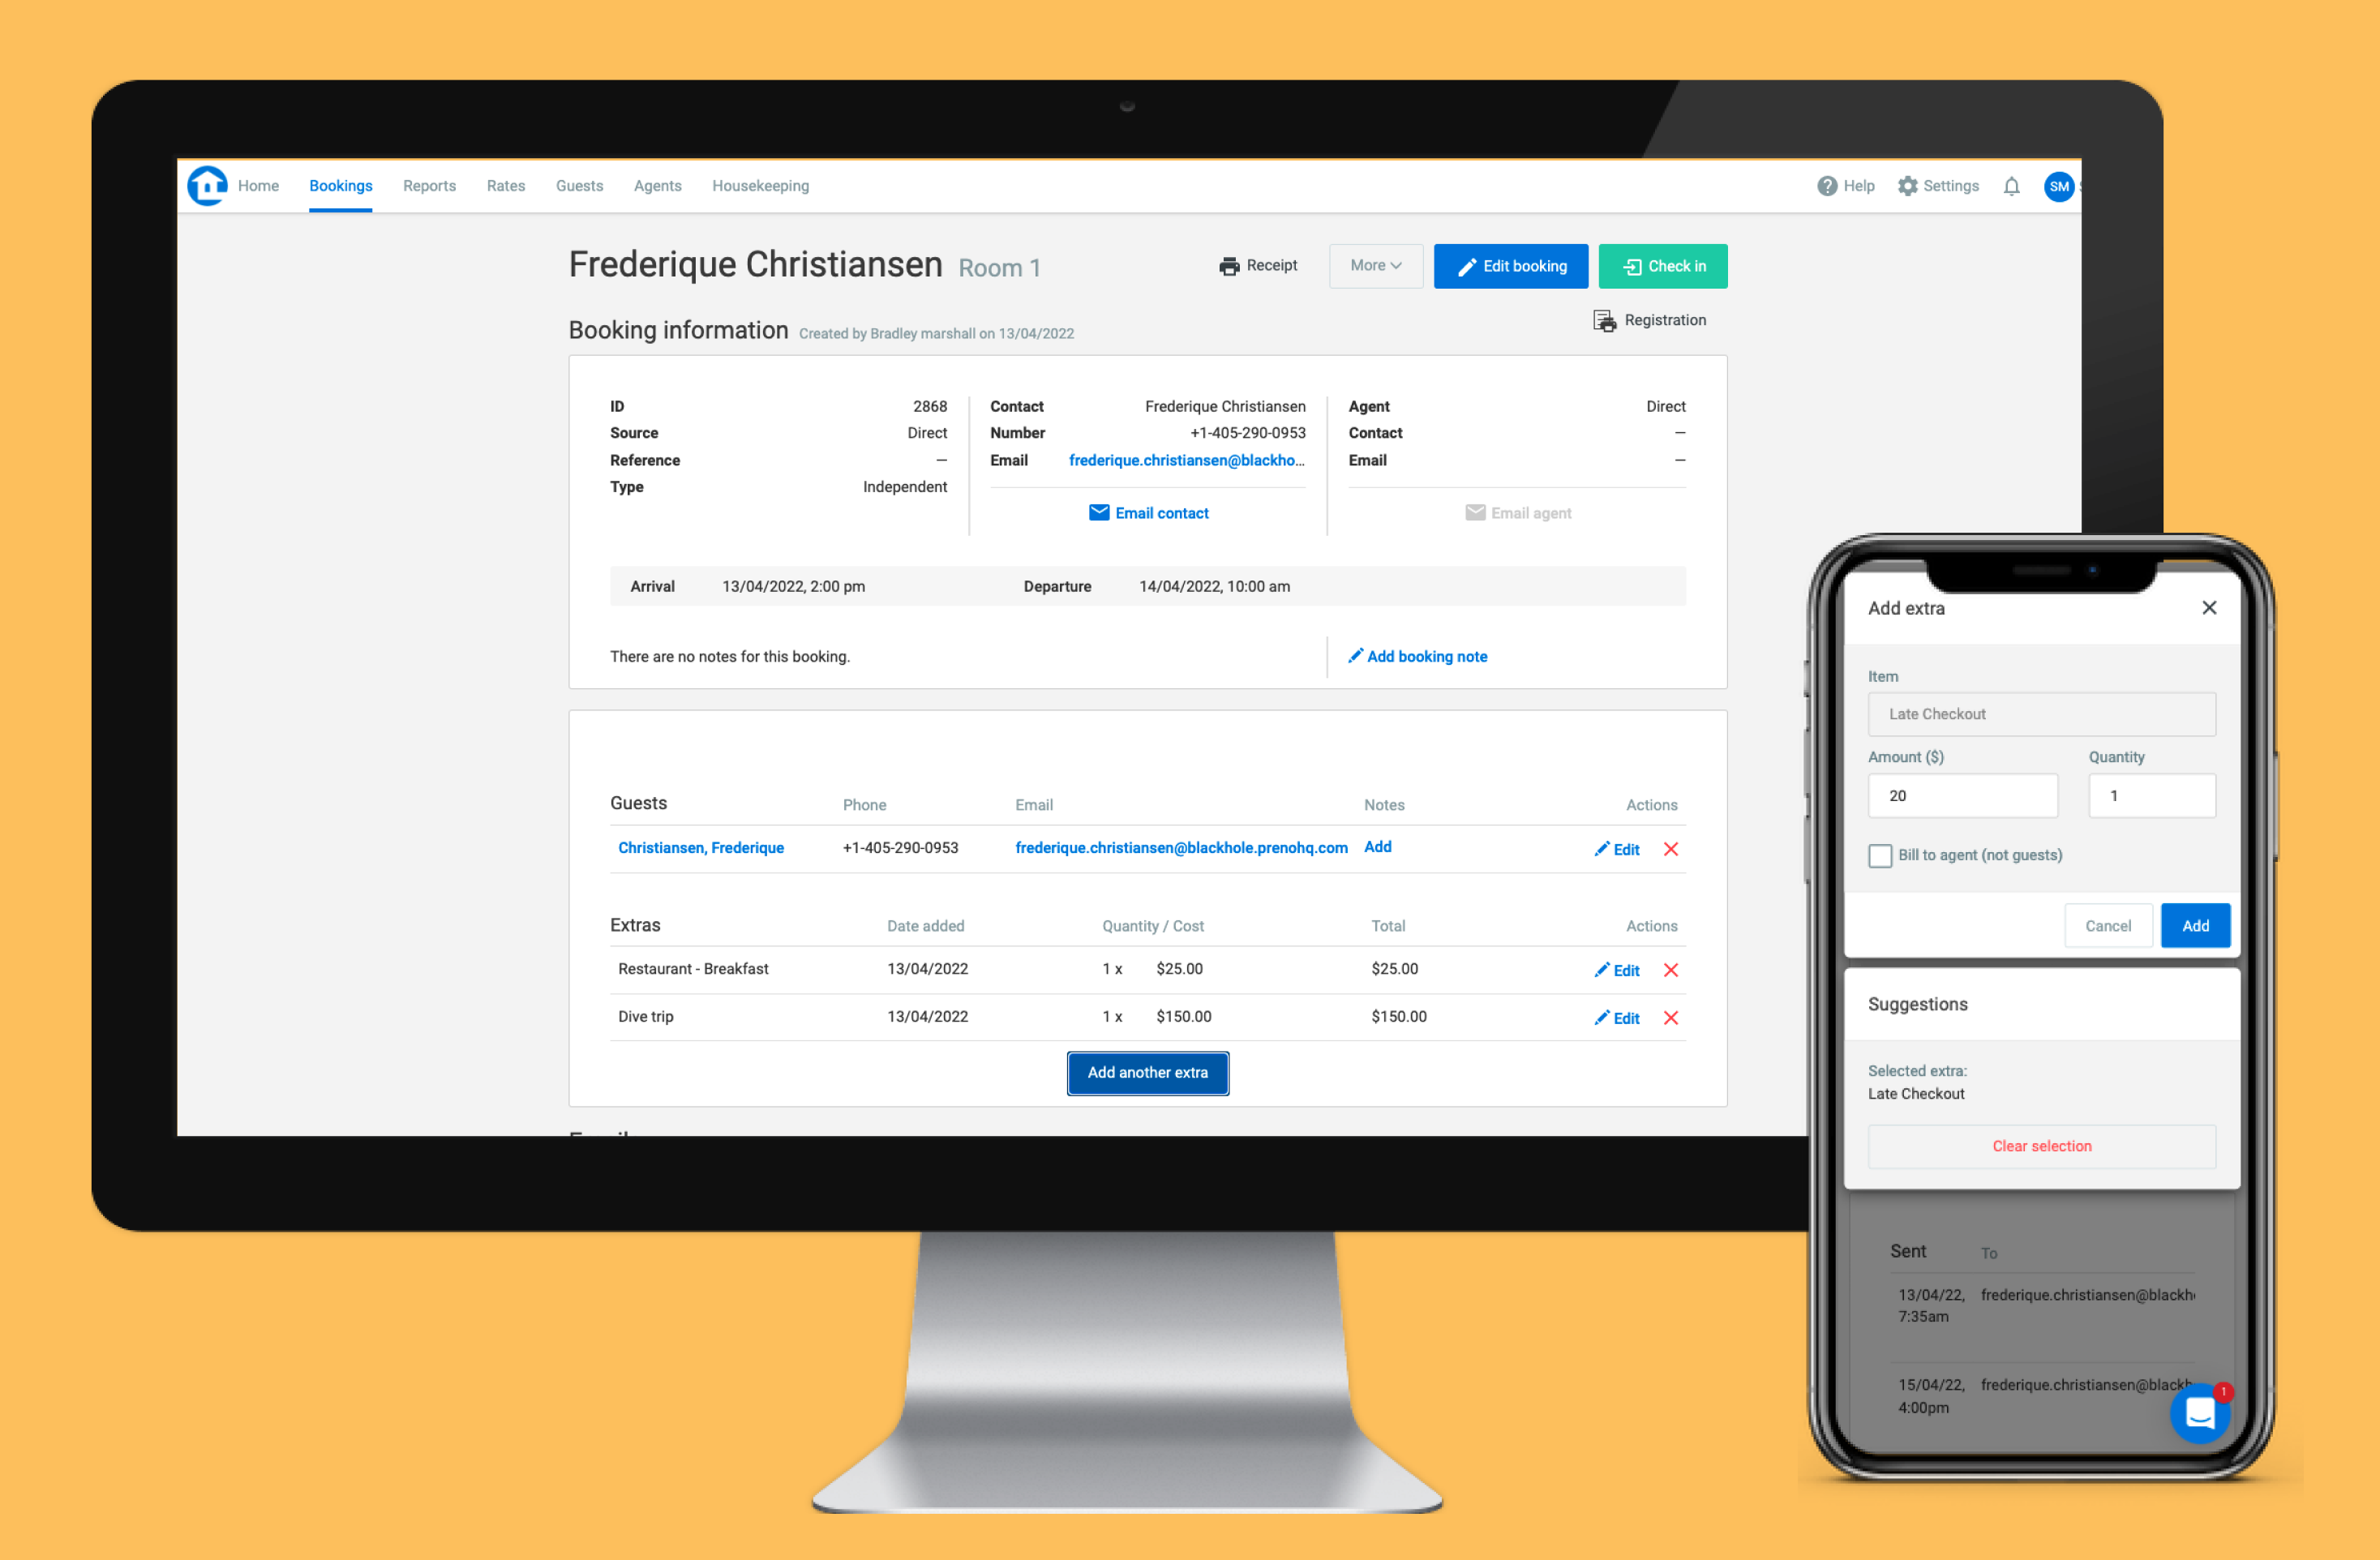 Preno's PMS Guest Profile Functionality | Store credit card details and preferences within Preno, by building comprehensive guest profiles. Remember preferences like favourite rooms or coffee to personalise guest experiences.